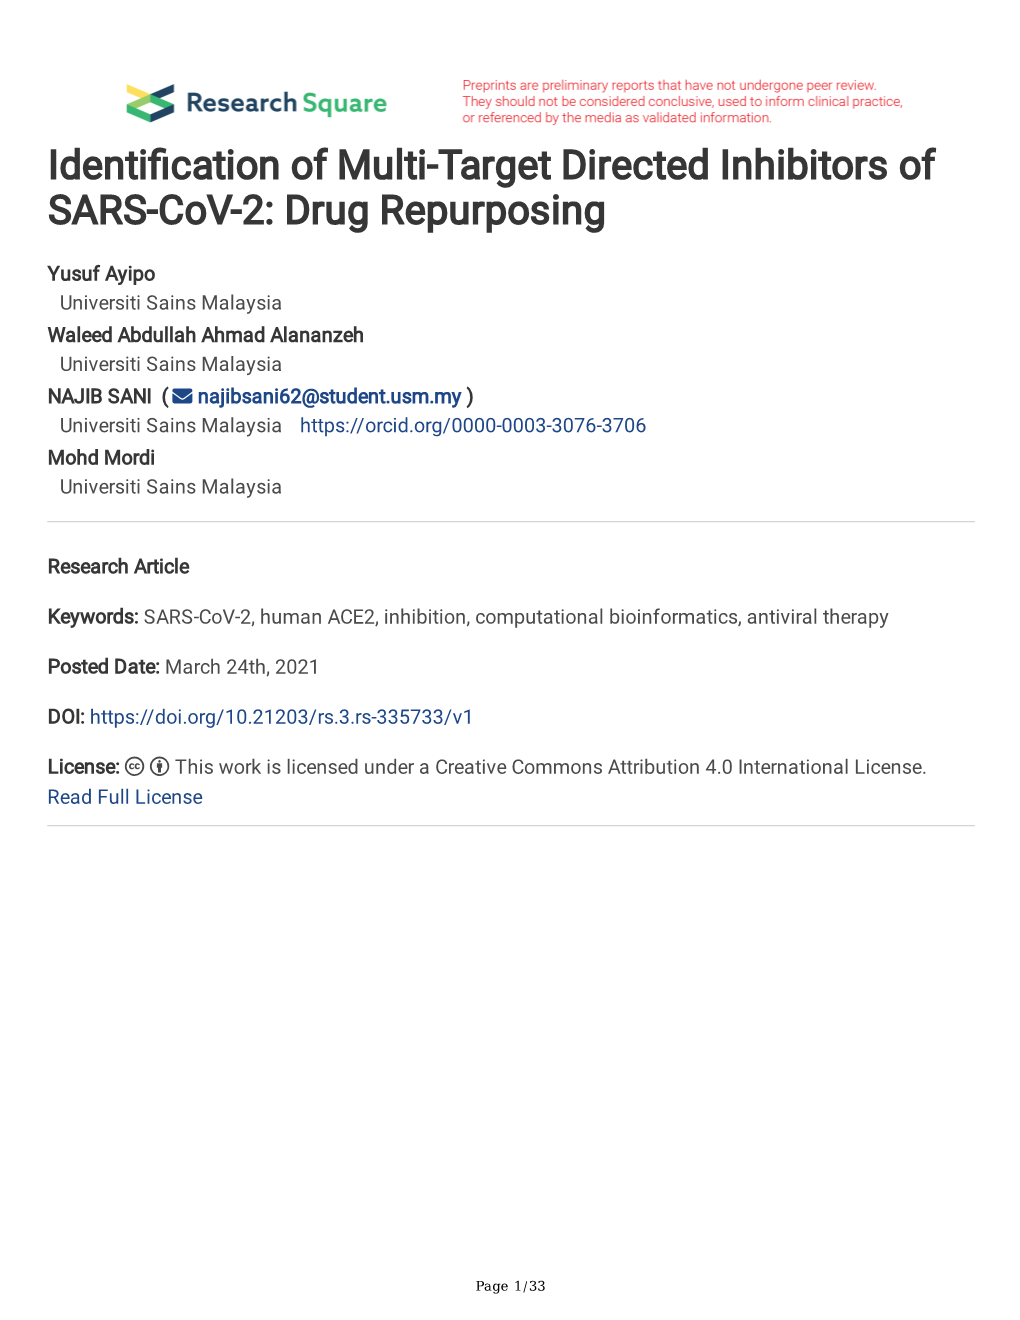 Identi Cation of Multi-Target Directed Inhibitors of SARS-Cov-2